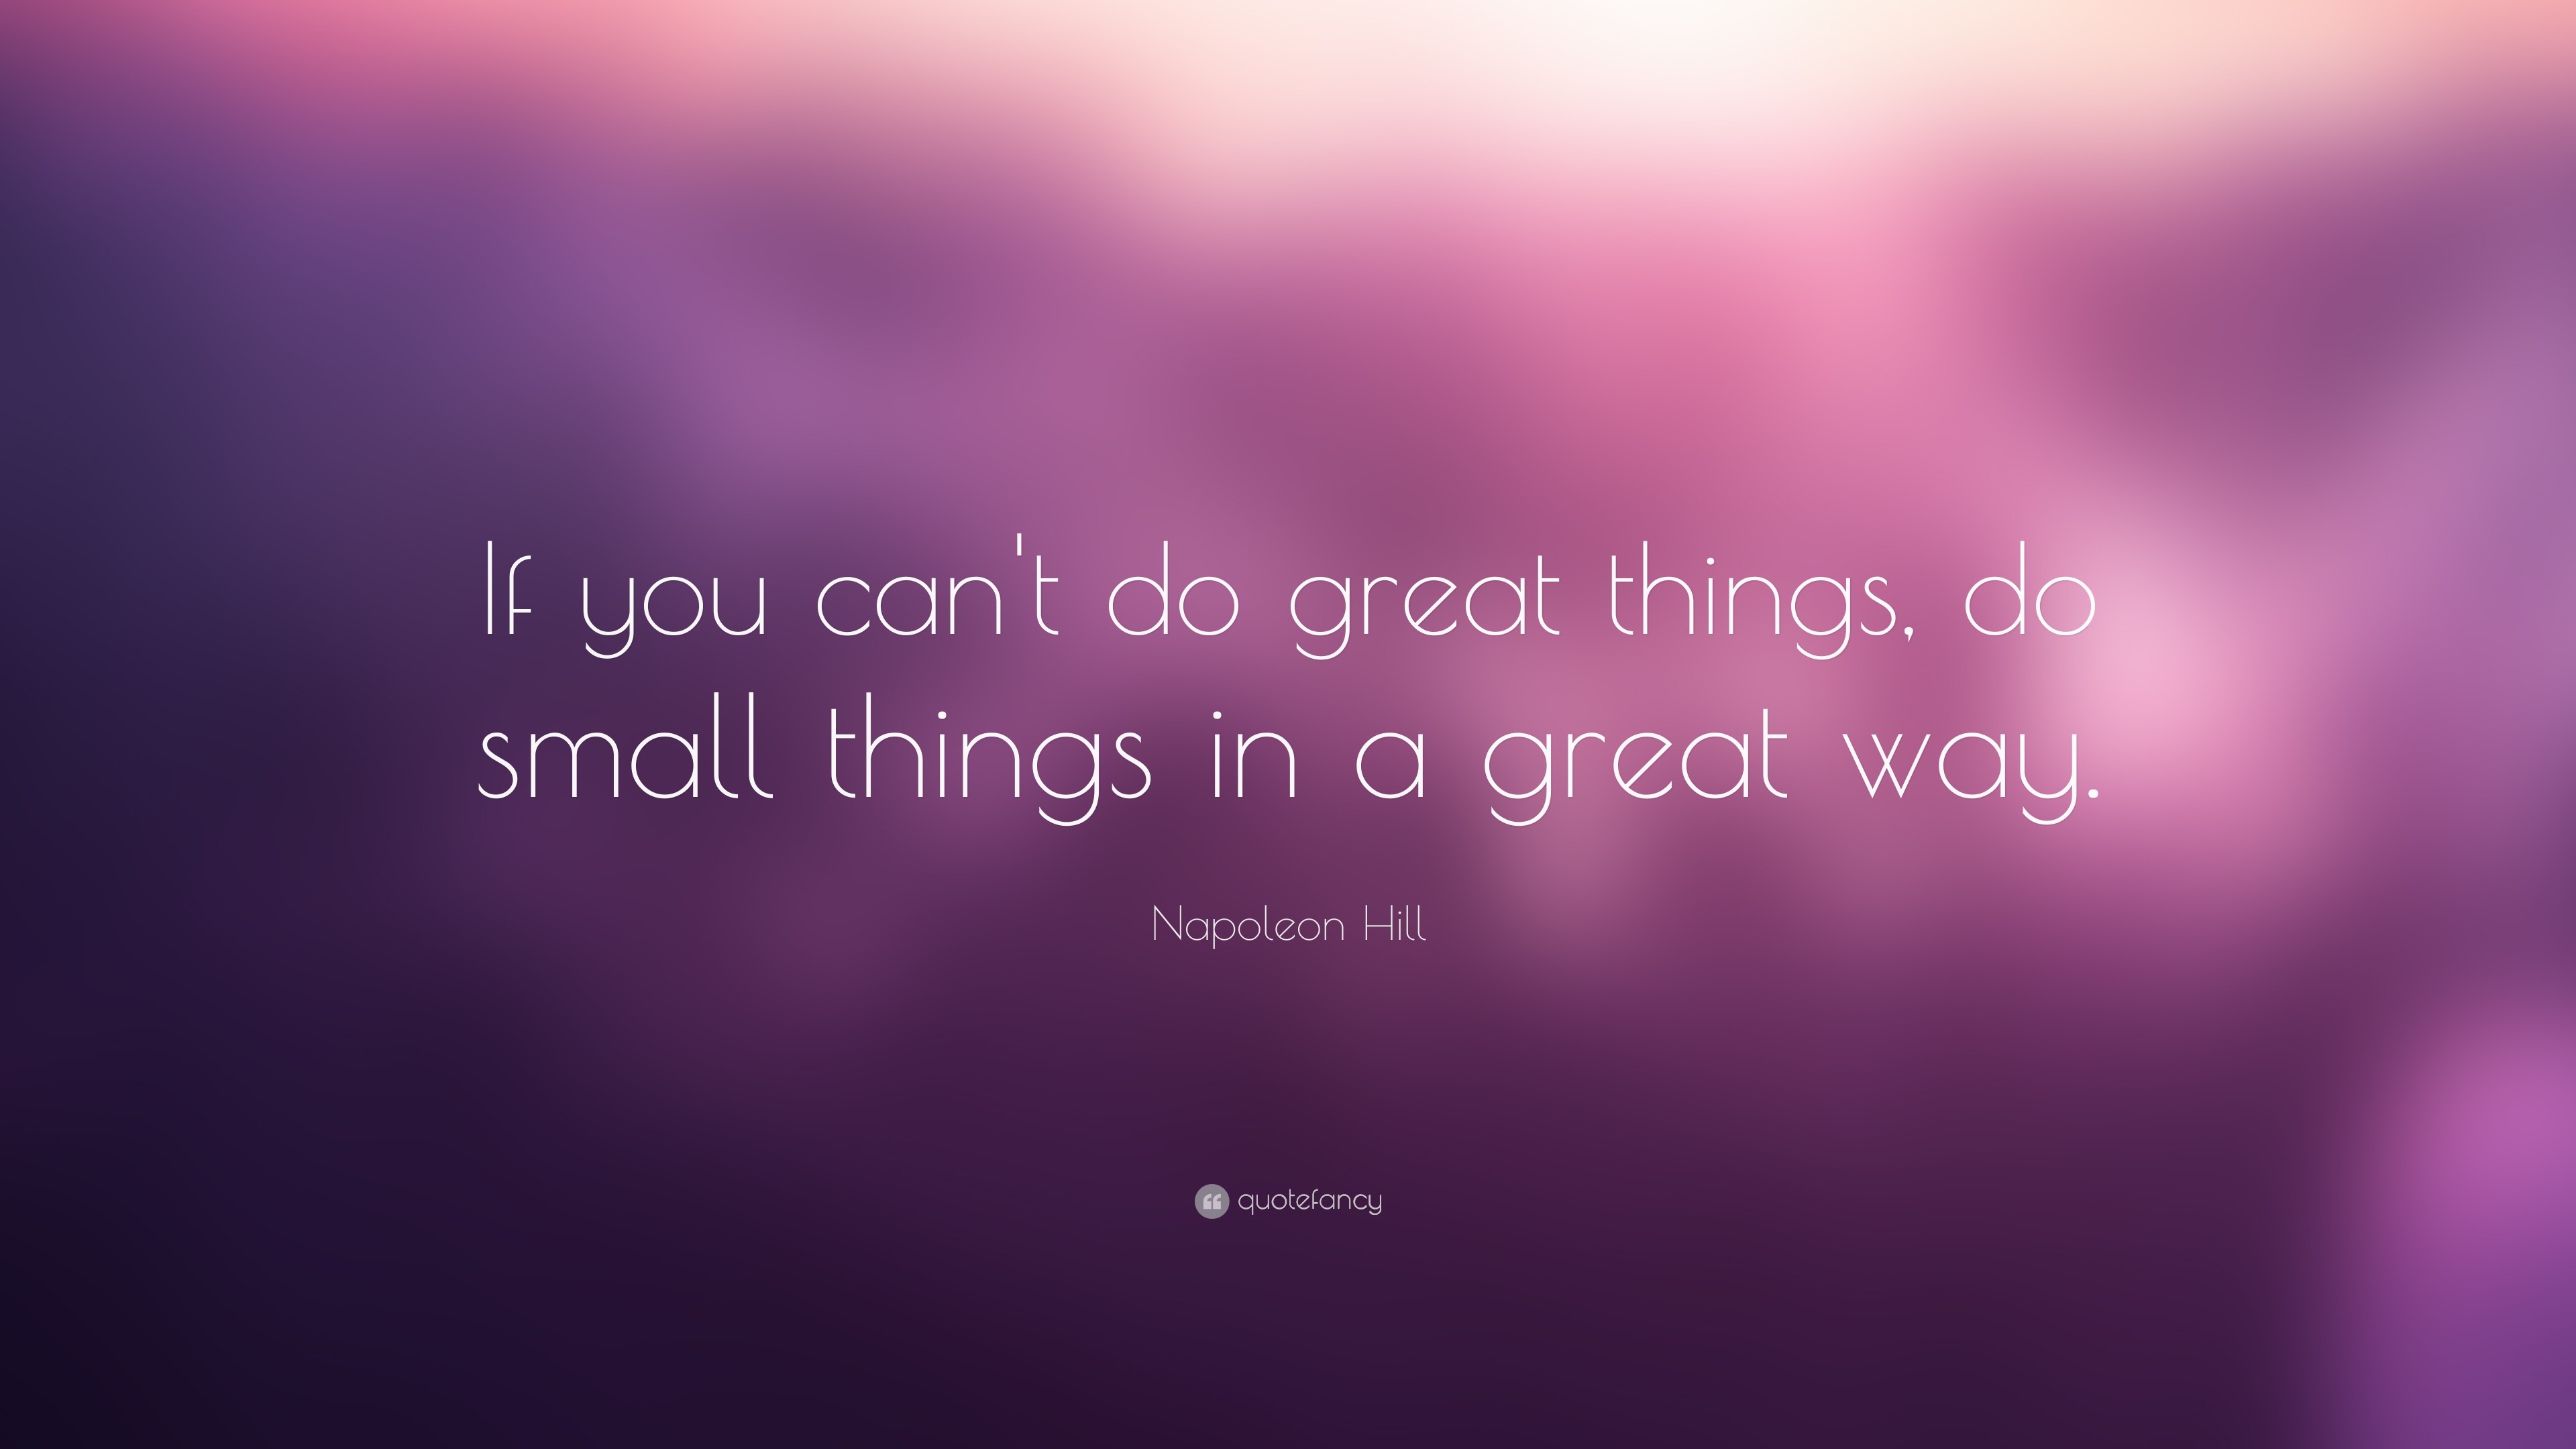 Napoleon Hill Quote: “If you can't do great things, do small things in a  great